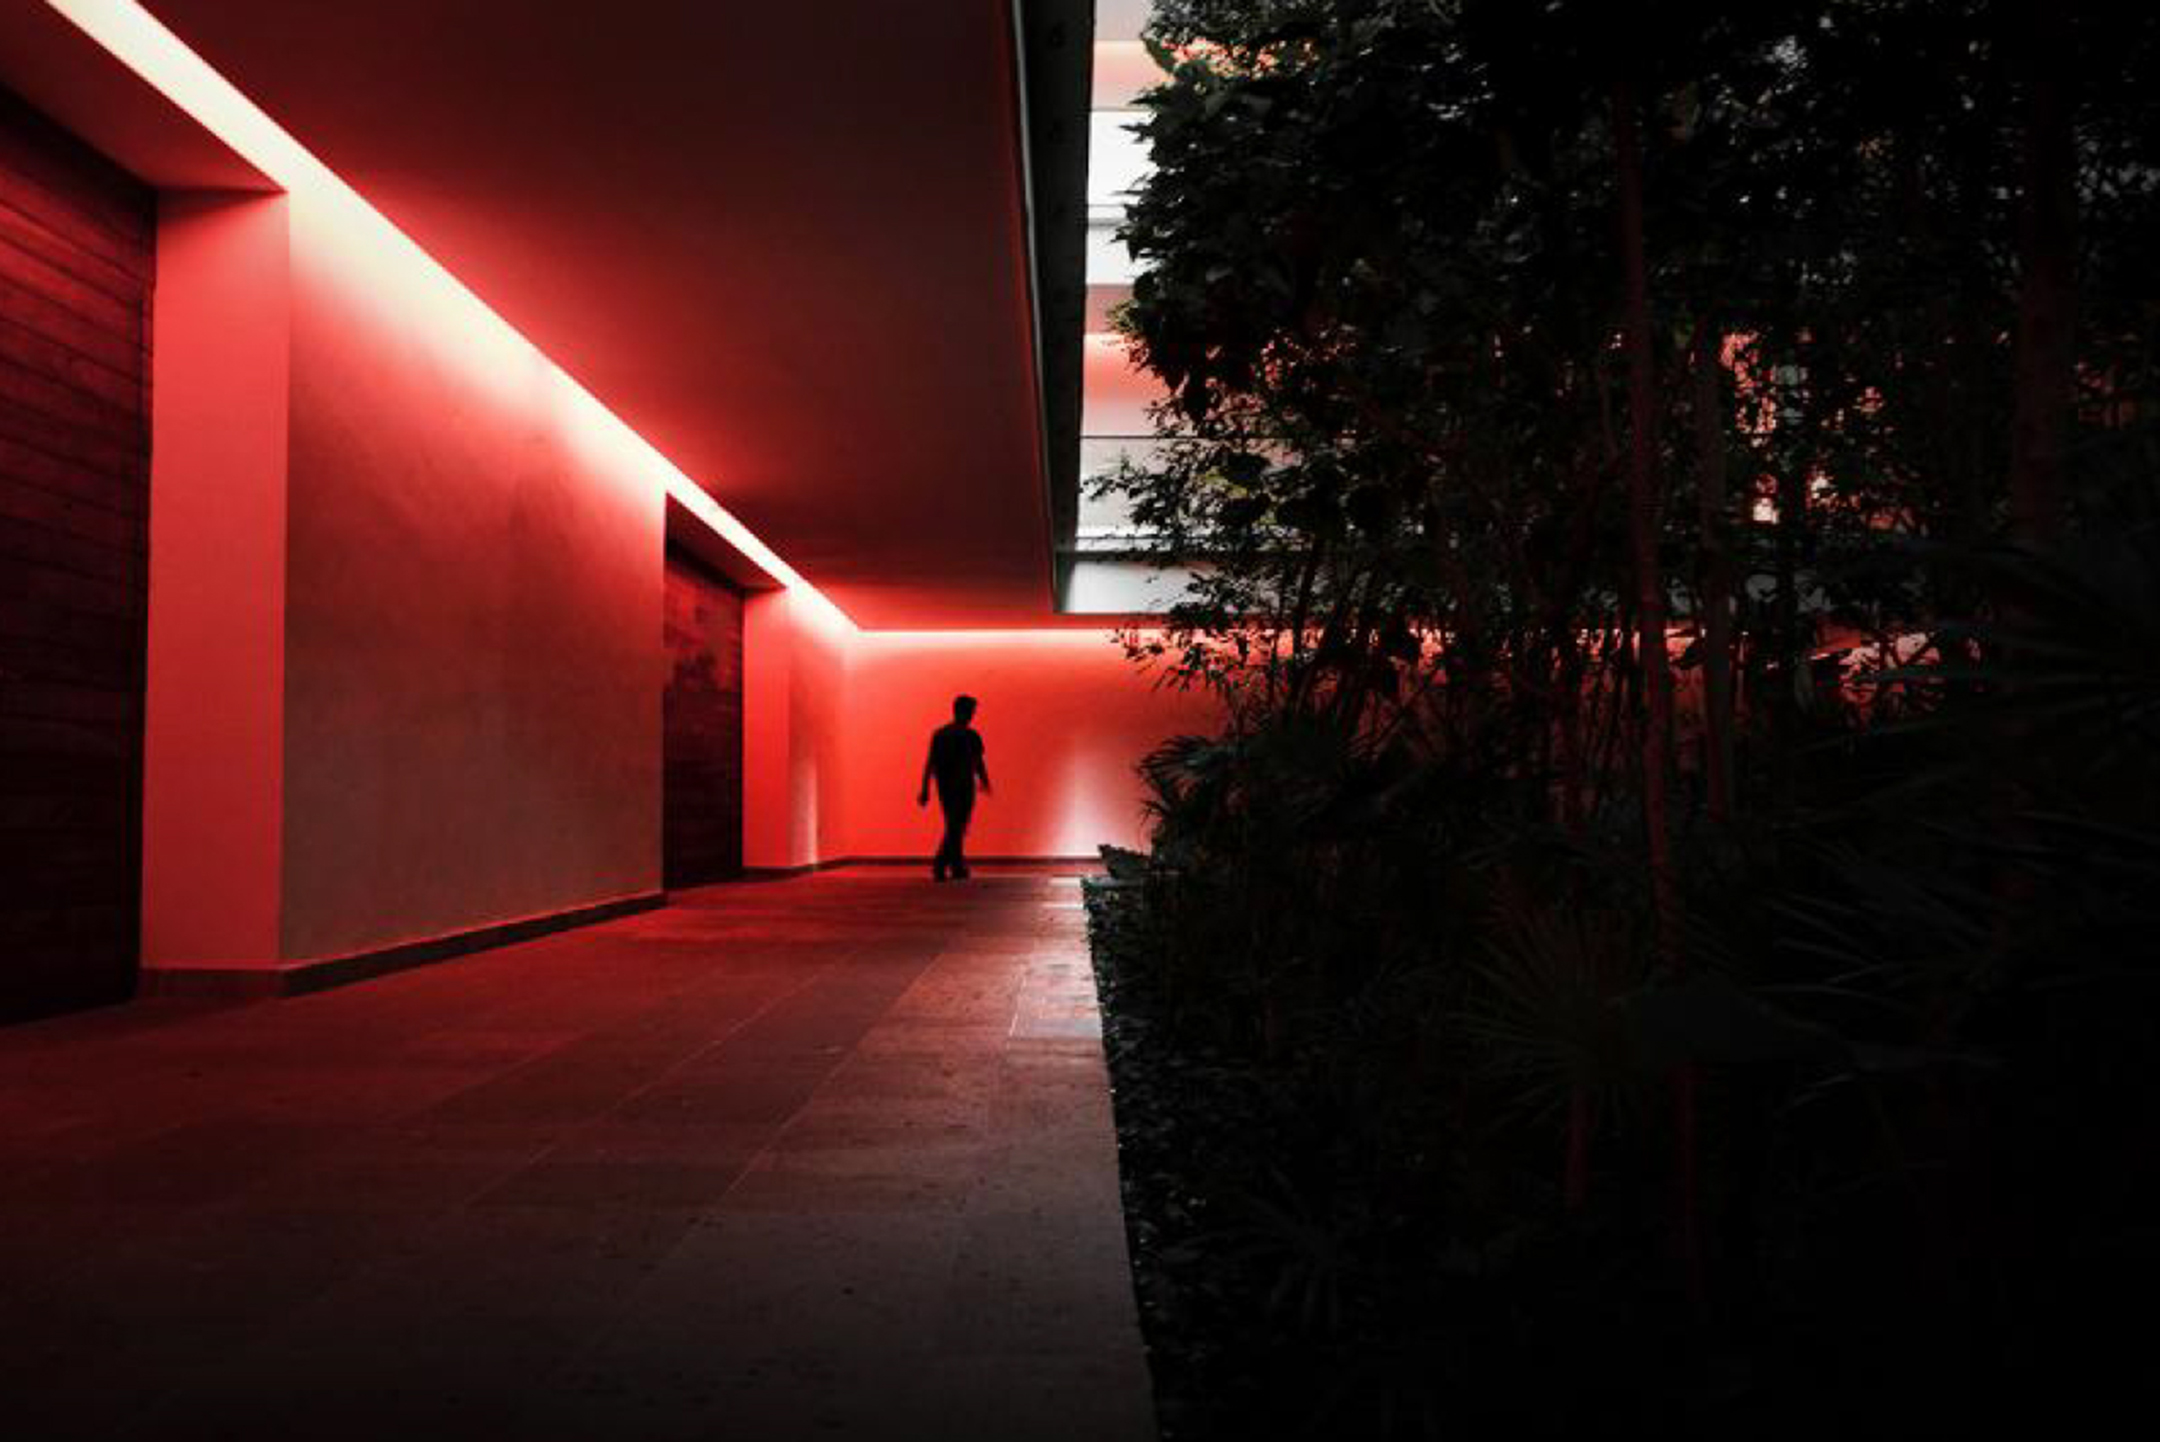 Photo of a person walking by an illuminated red wall at night